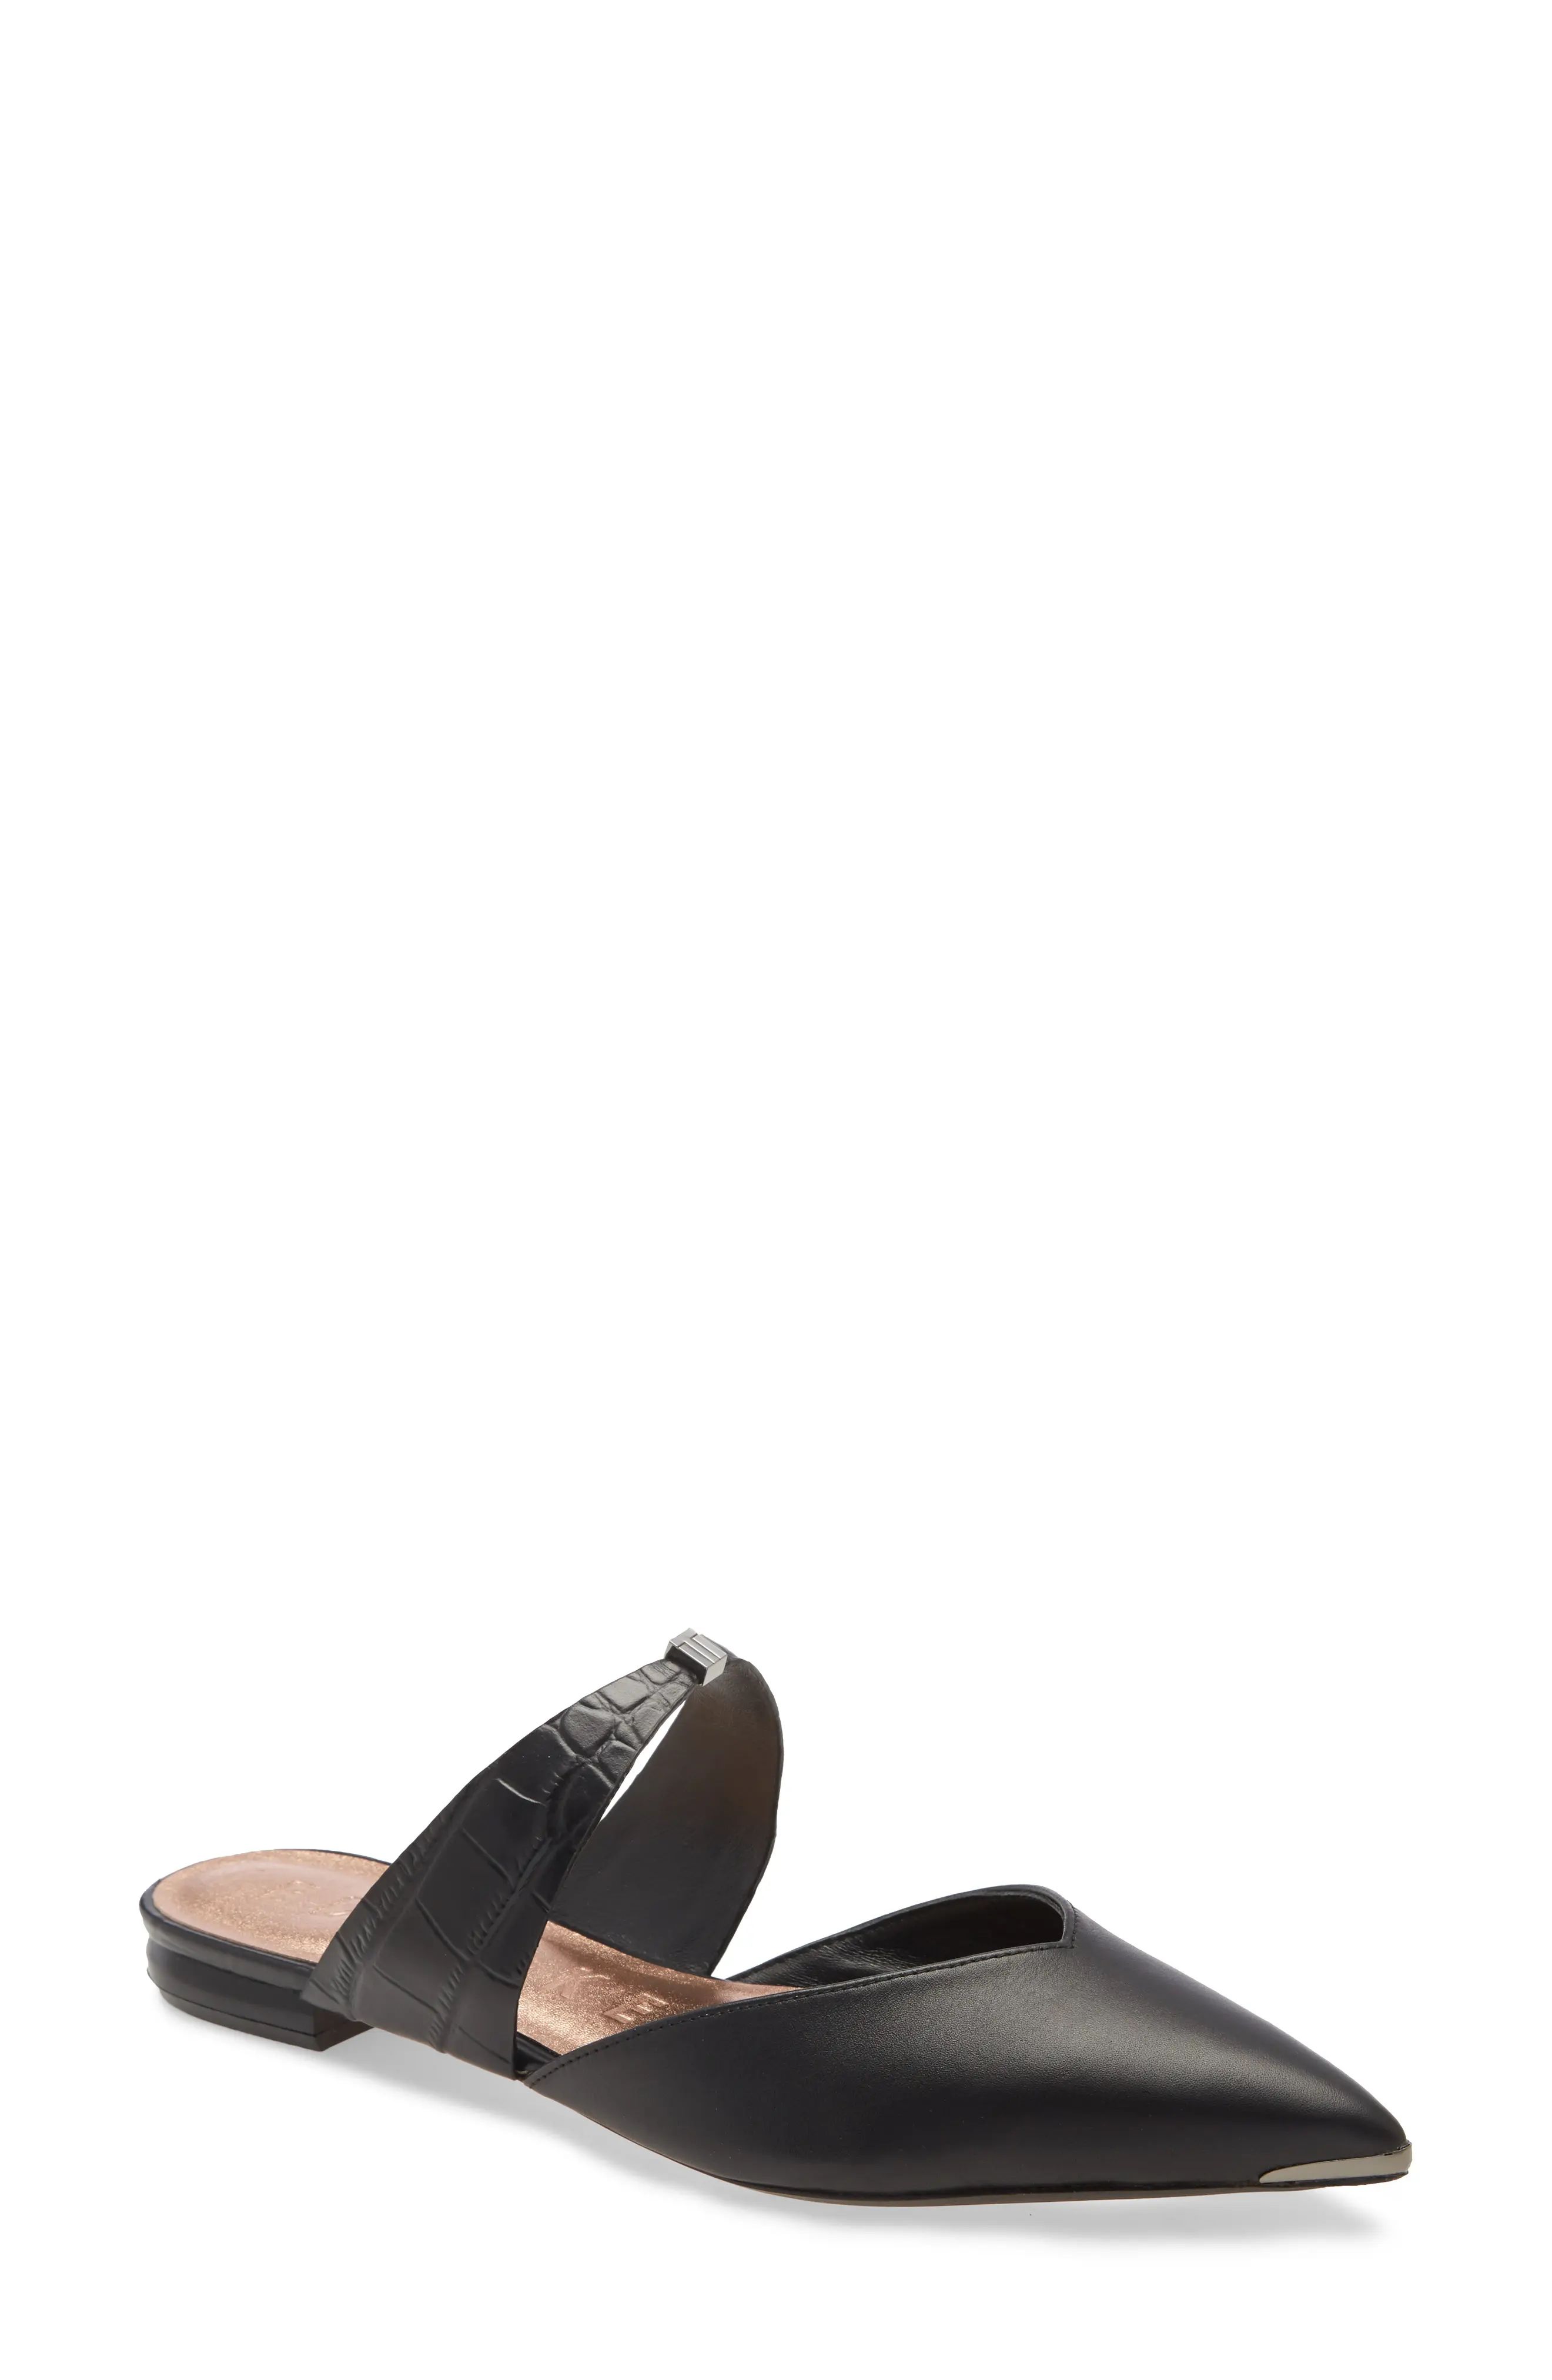 Ted Baker London Orlya Pointed Toe Mule, Size 6Us in Black Leather at Nordstrom | Nordstrom